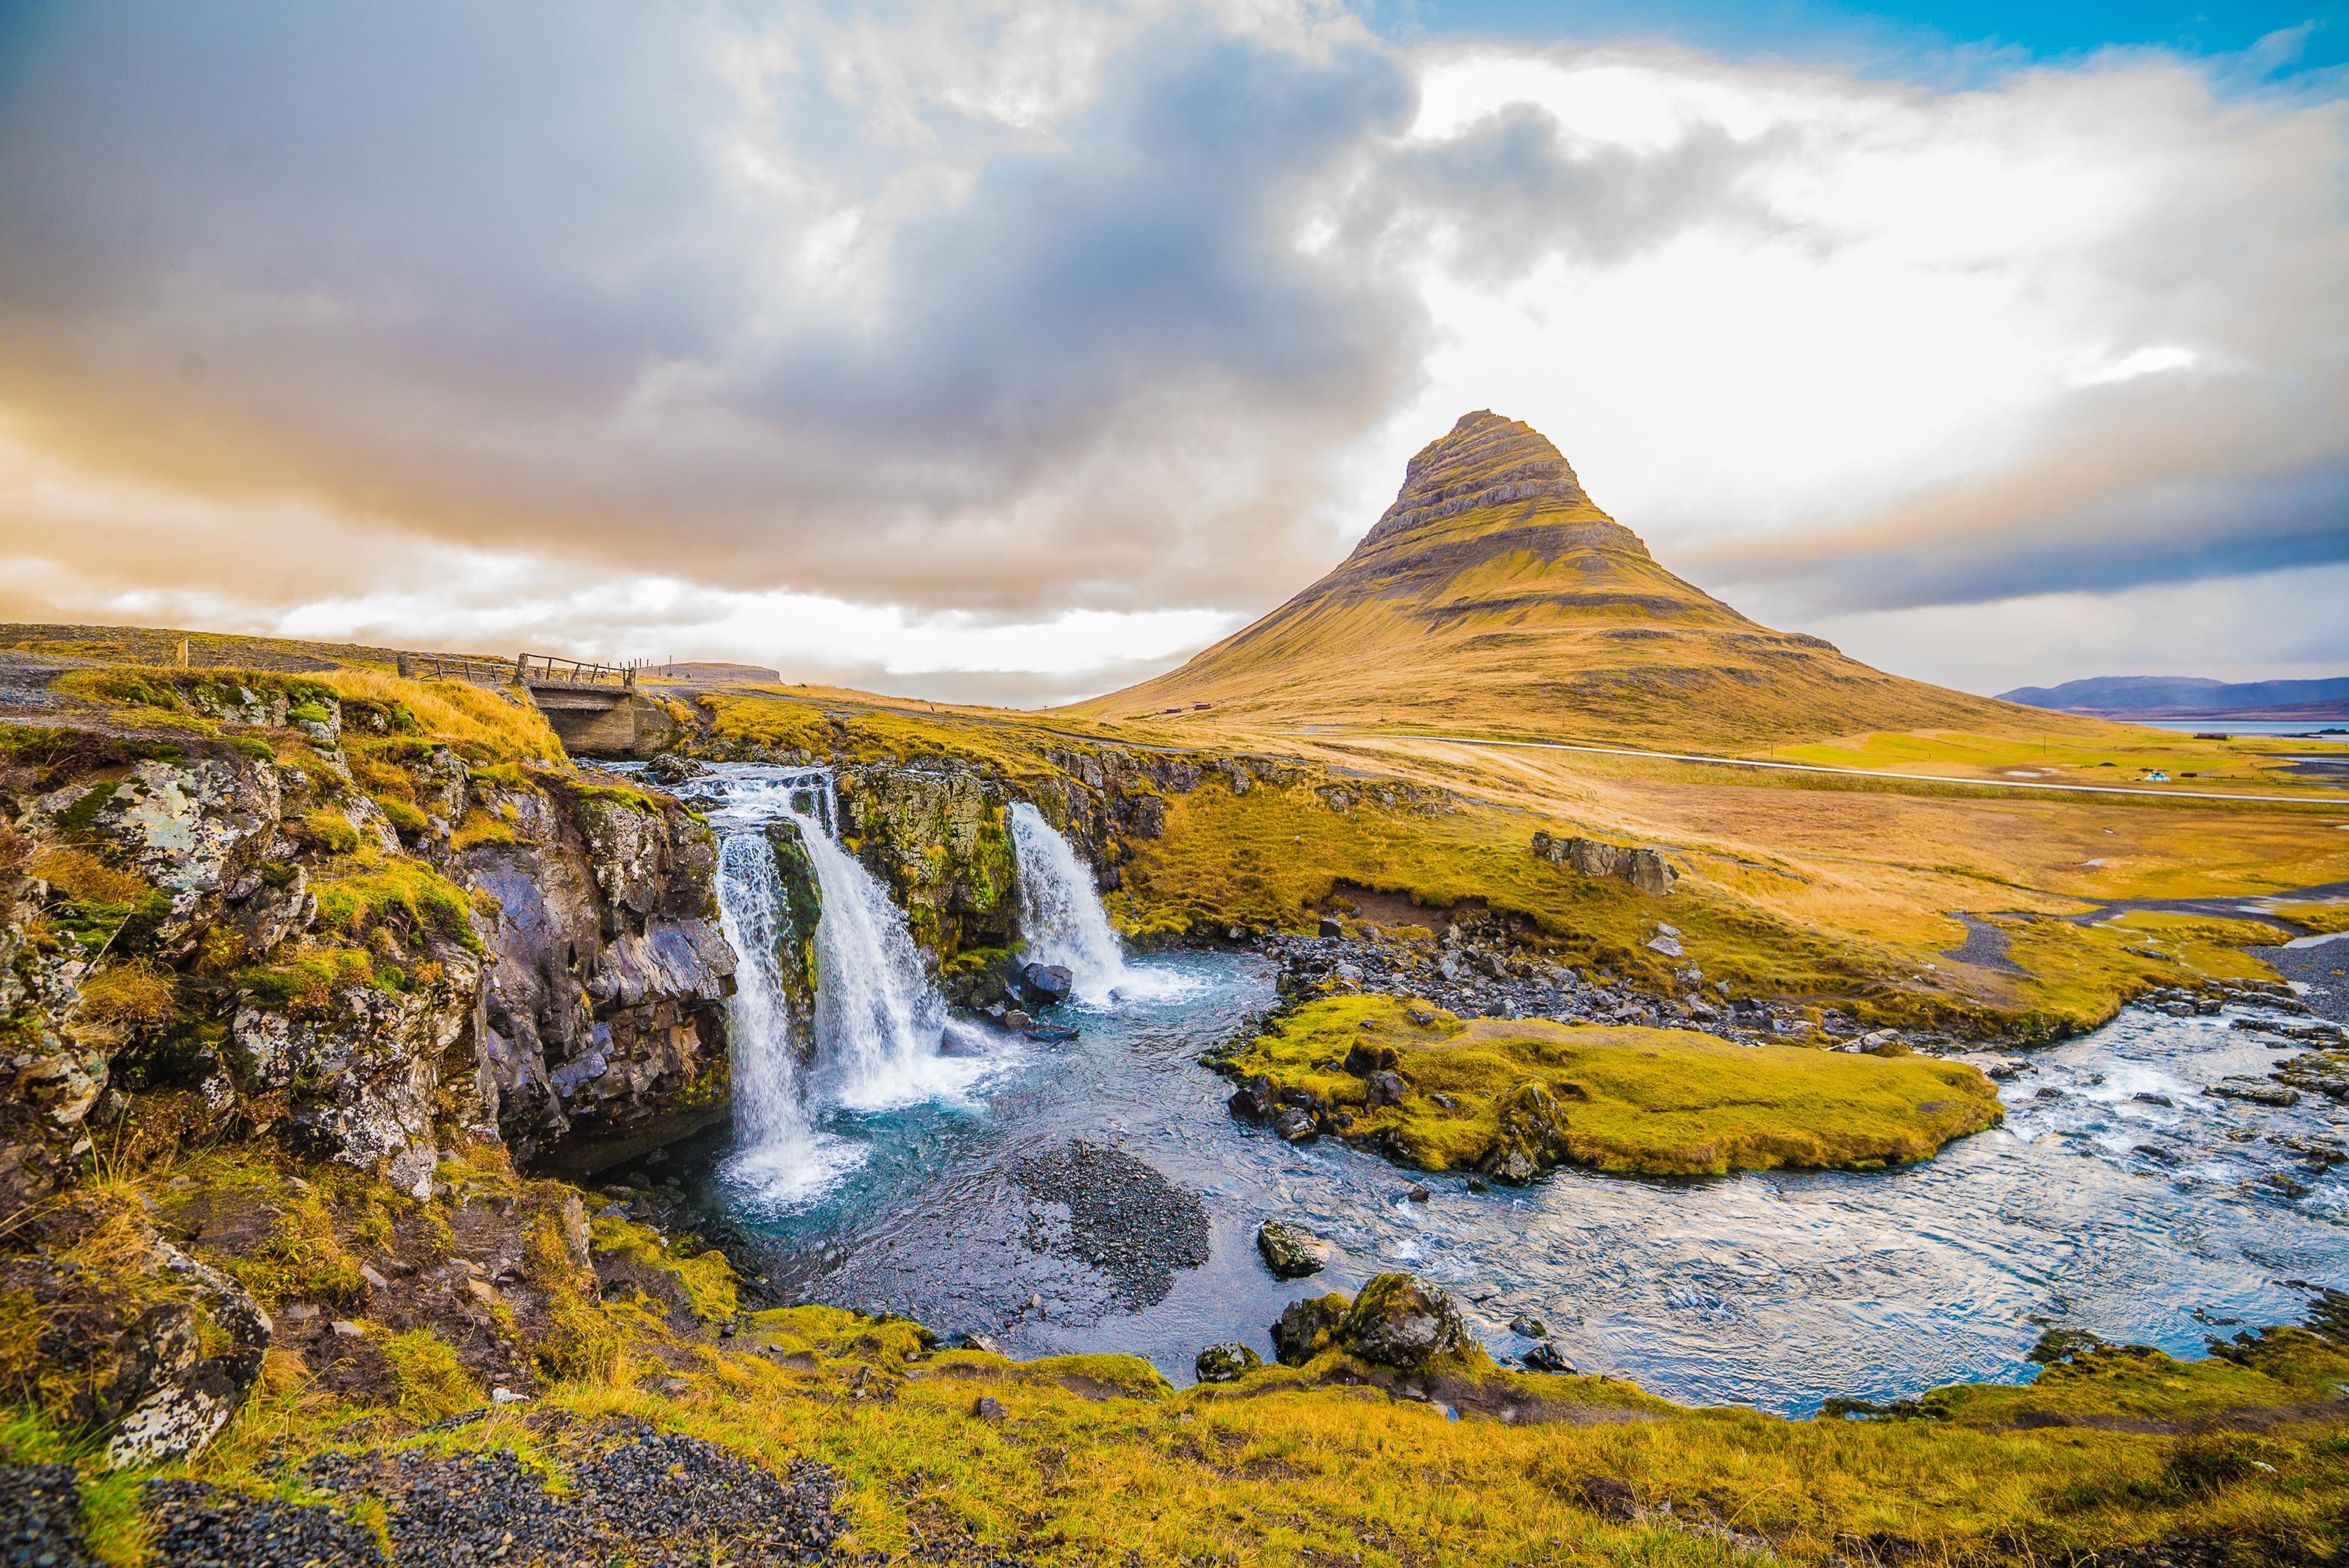 Beautiful blue cascades with the cone-shaped Kirkjufell mountain in the background